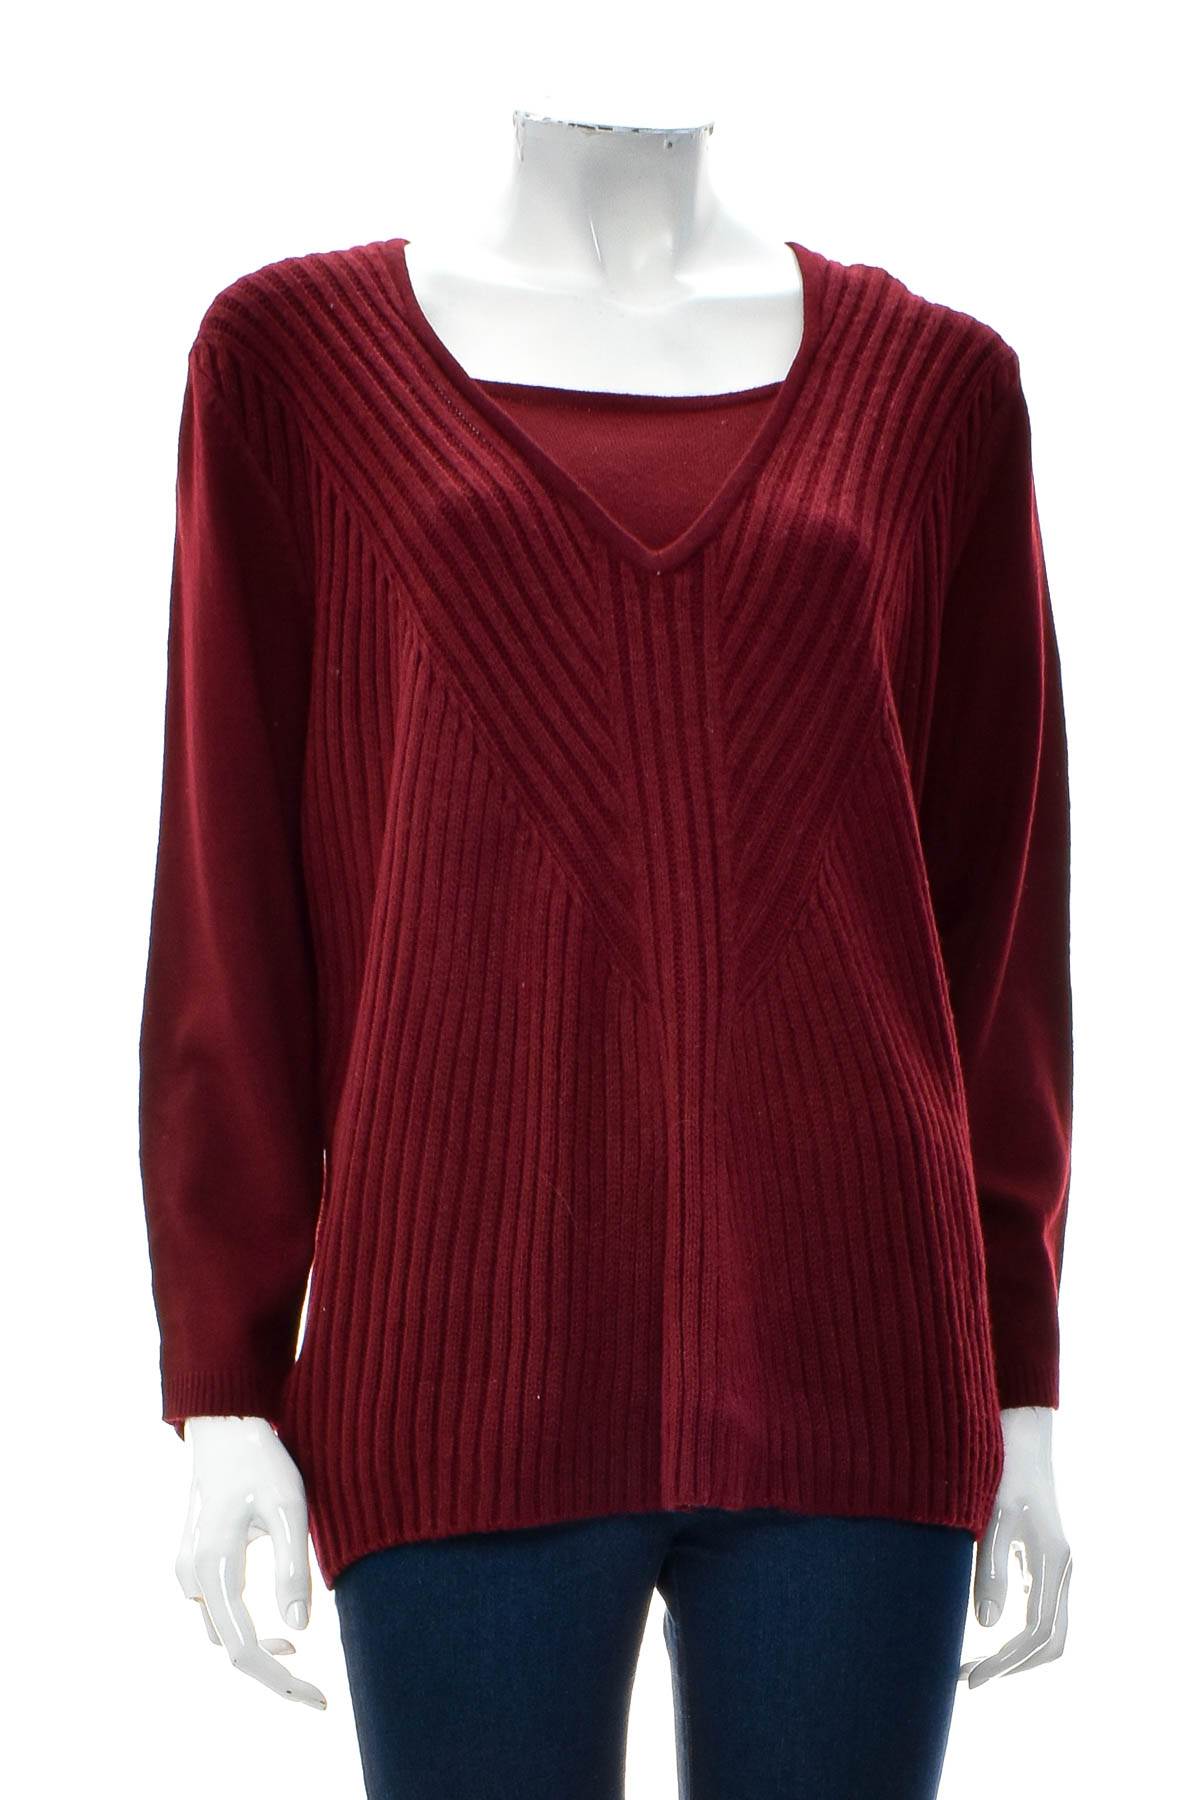 Women's sweater - Tradition - 0